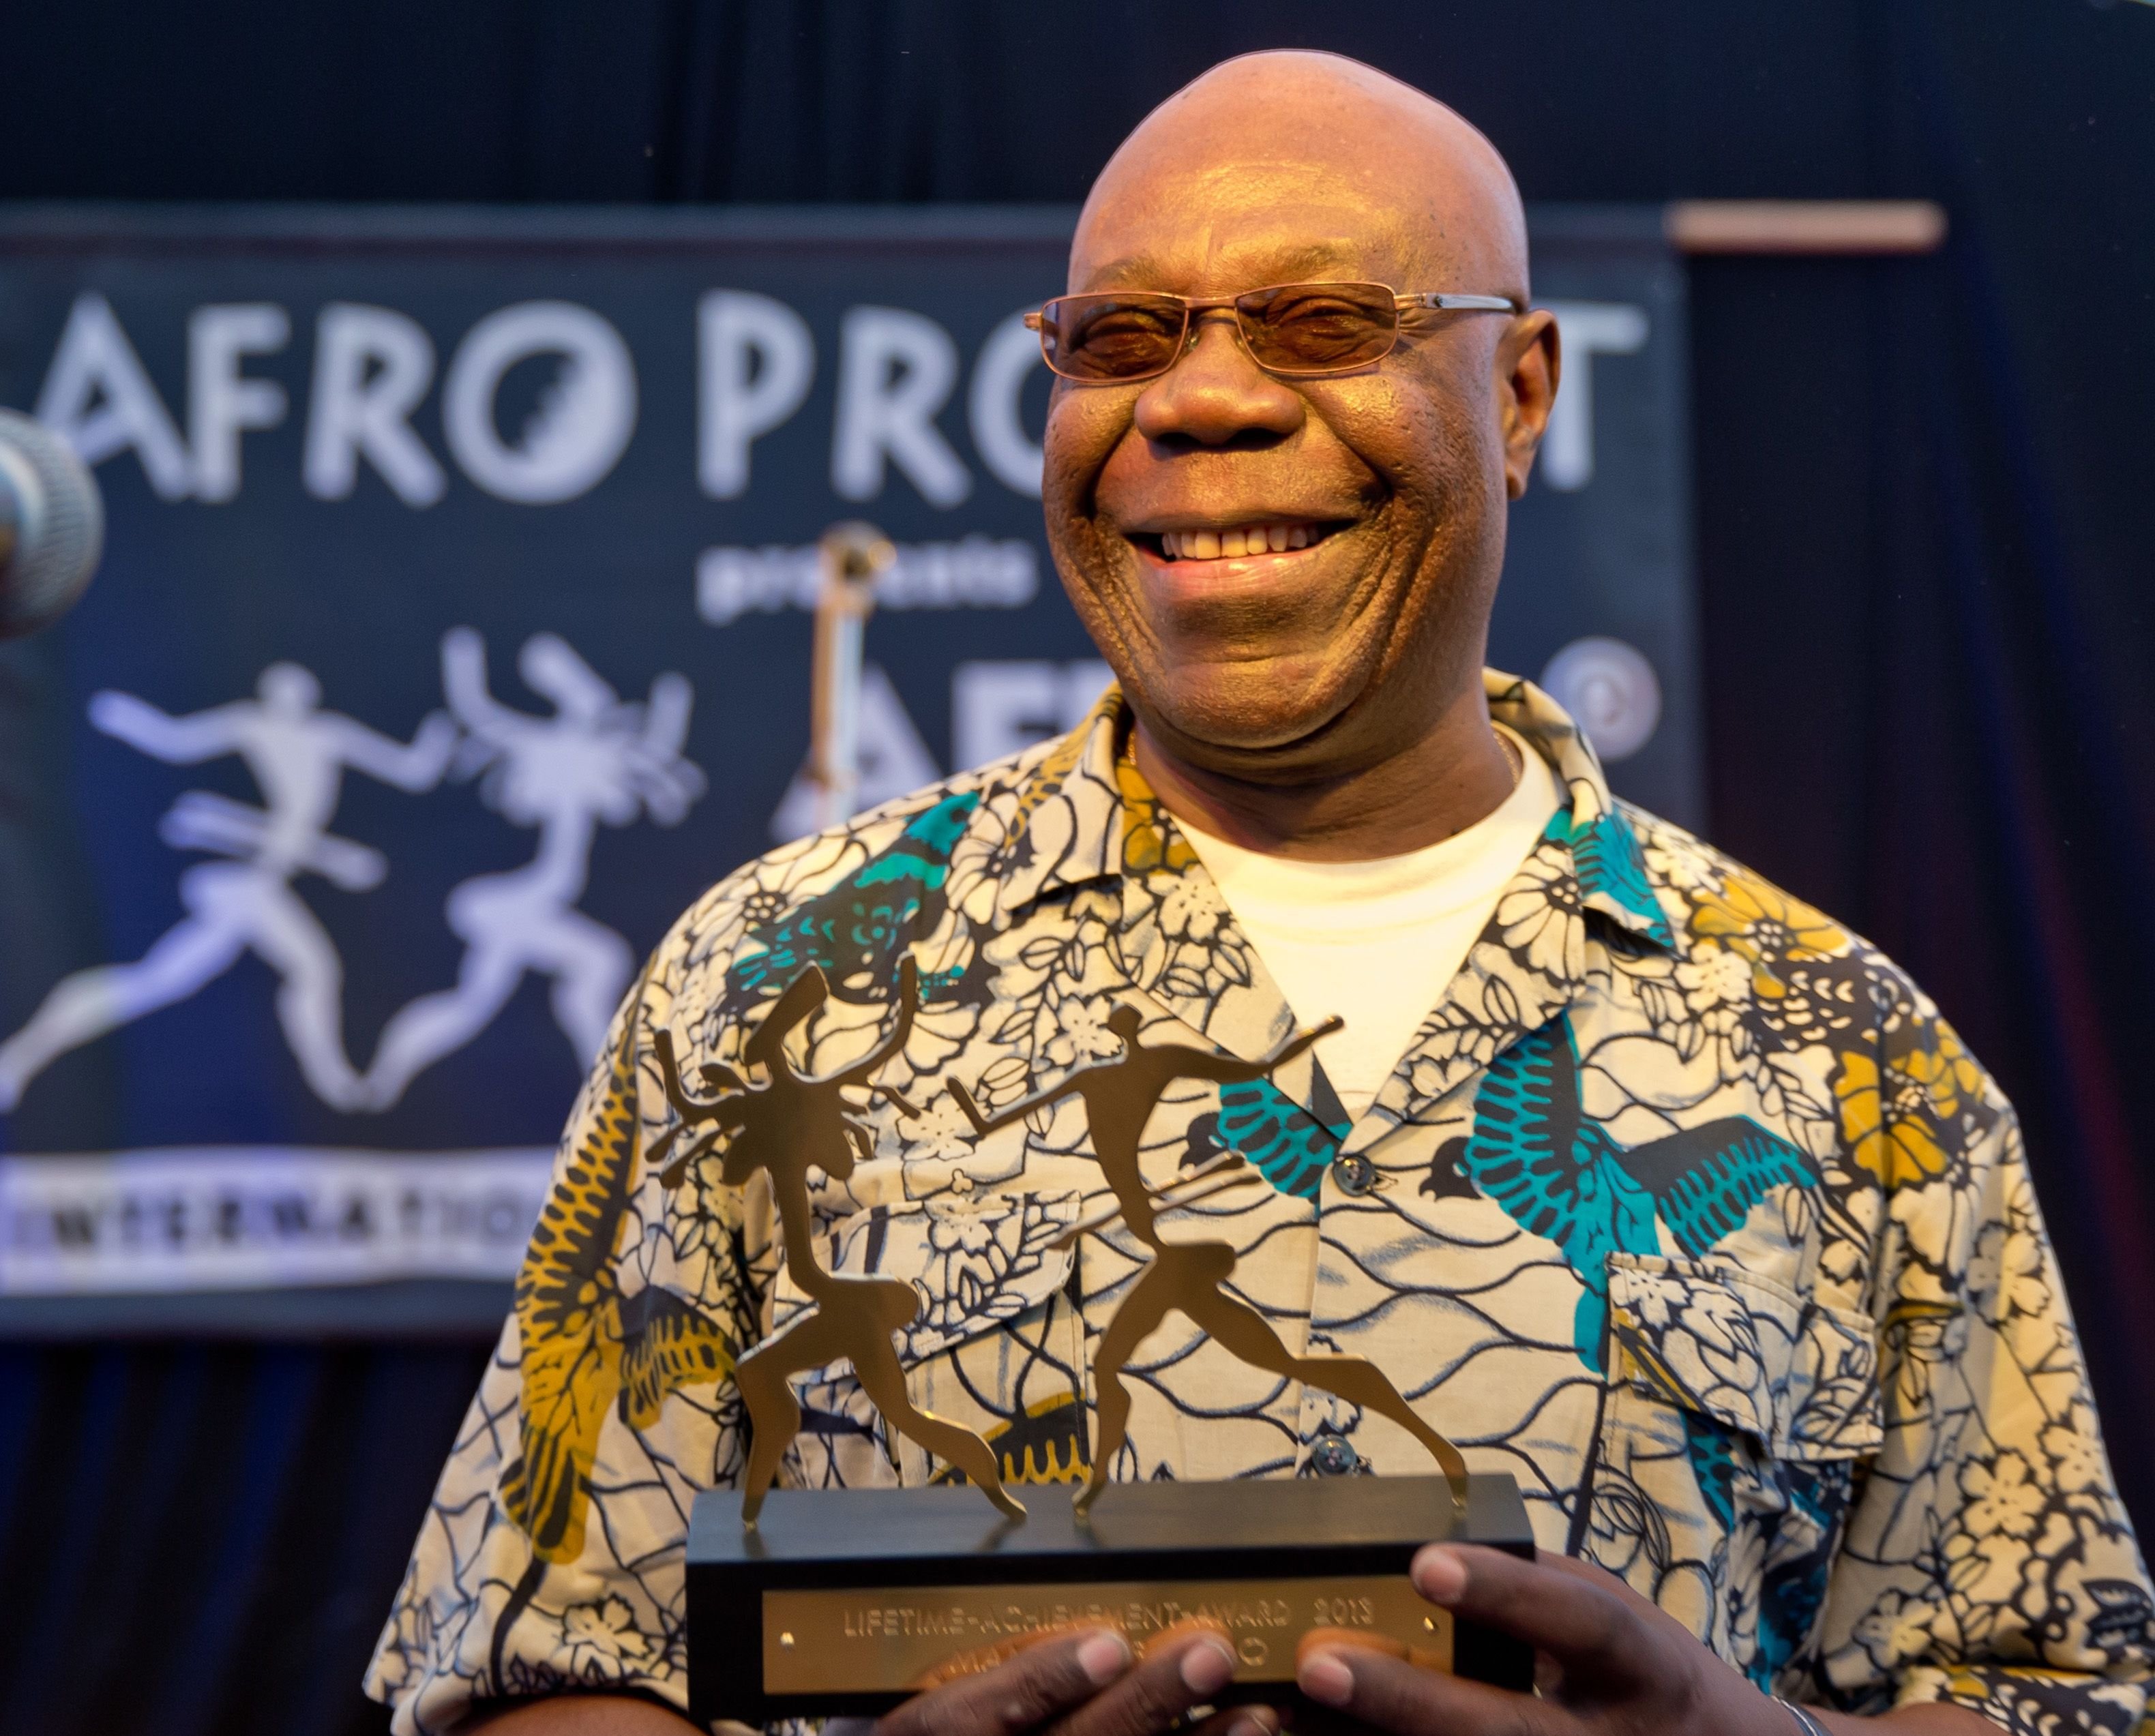 Musician Manu Dibango from Cameroon receives 'Lifetime Achievement Award' during the opening of 25th Africa festival in Wuerzburg, Germany, 30 May 2013. | Source: Getty Images